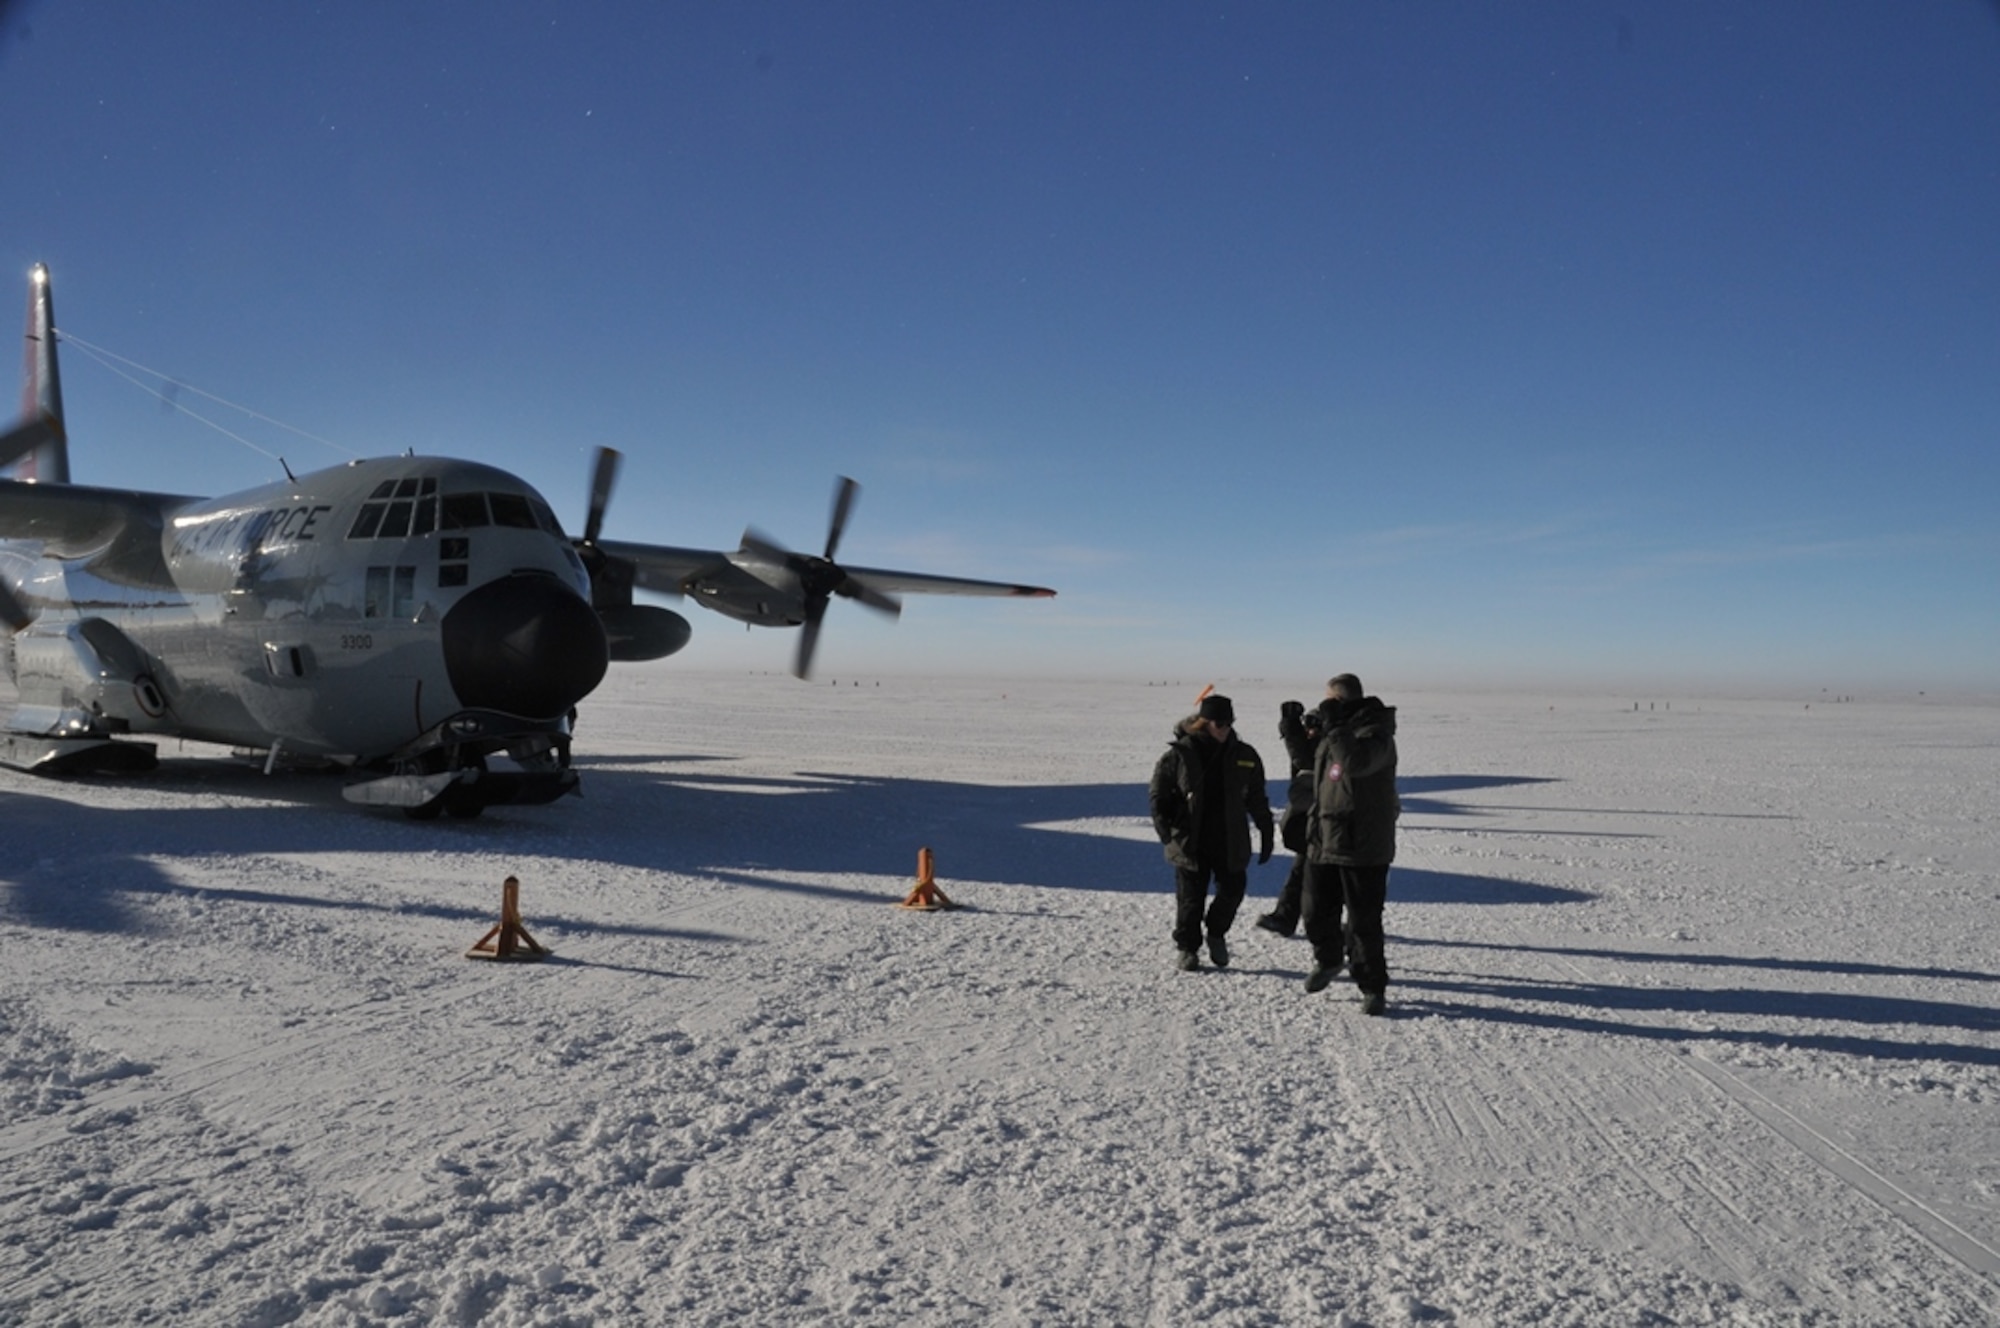 Secretary of the Air Force Deborah Lee James (left) walks from a LC-130 Hercules with aircrew from the 139th Expeditionary Airlift Squadron during her visit with participants of Operation Deep Freeze, at McMurdo Station, Antarctica, Jan. 25, 2015. DEEP FREEZE involves active duty and Reserve C-17 Globemaster III support from Joint Base Lewis-McChord, Wa., LC-130 Hercules support from the New York Air National Guard, sealift support from the U.S. Coast Guard and Military Sealift Command, engineering and aviation services from U.S. Navy Space and Naval Warfare Systems Command, and cargo handling from the U.S. Navy. Operation DEEP FREEZE 2015 is part of the U.S. Antarctic program, which is managed by the National Science Foundation. (U.S. Air Force courtesy photo)